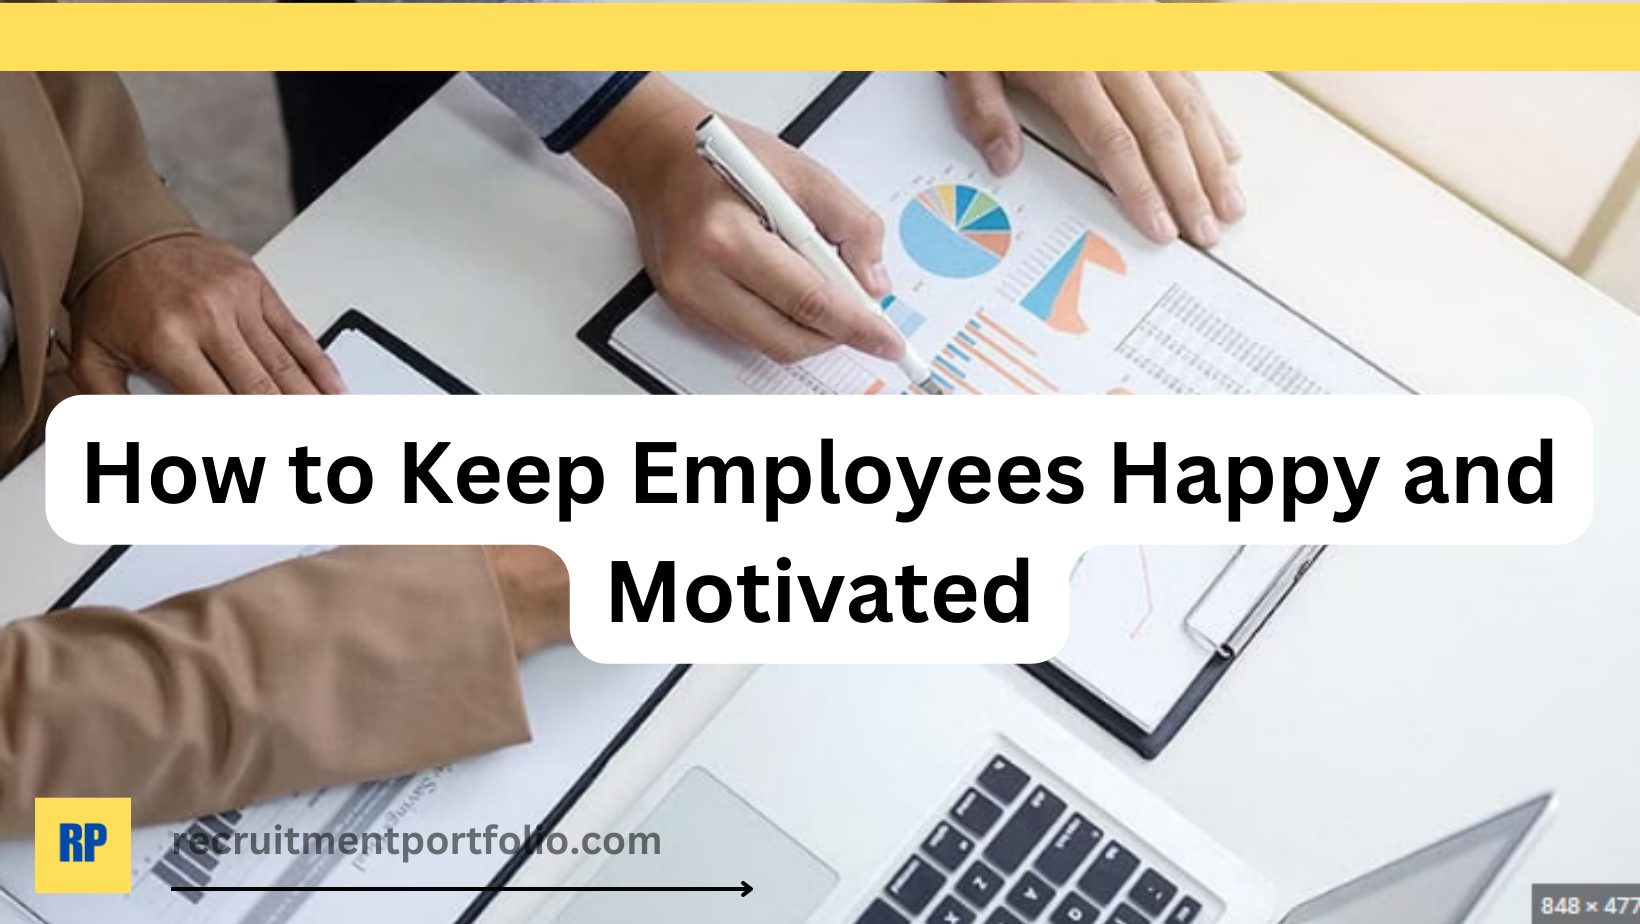 How to Keep Employees Happy